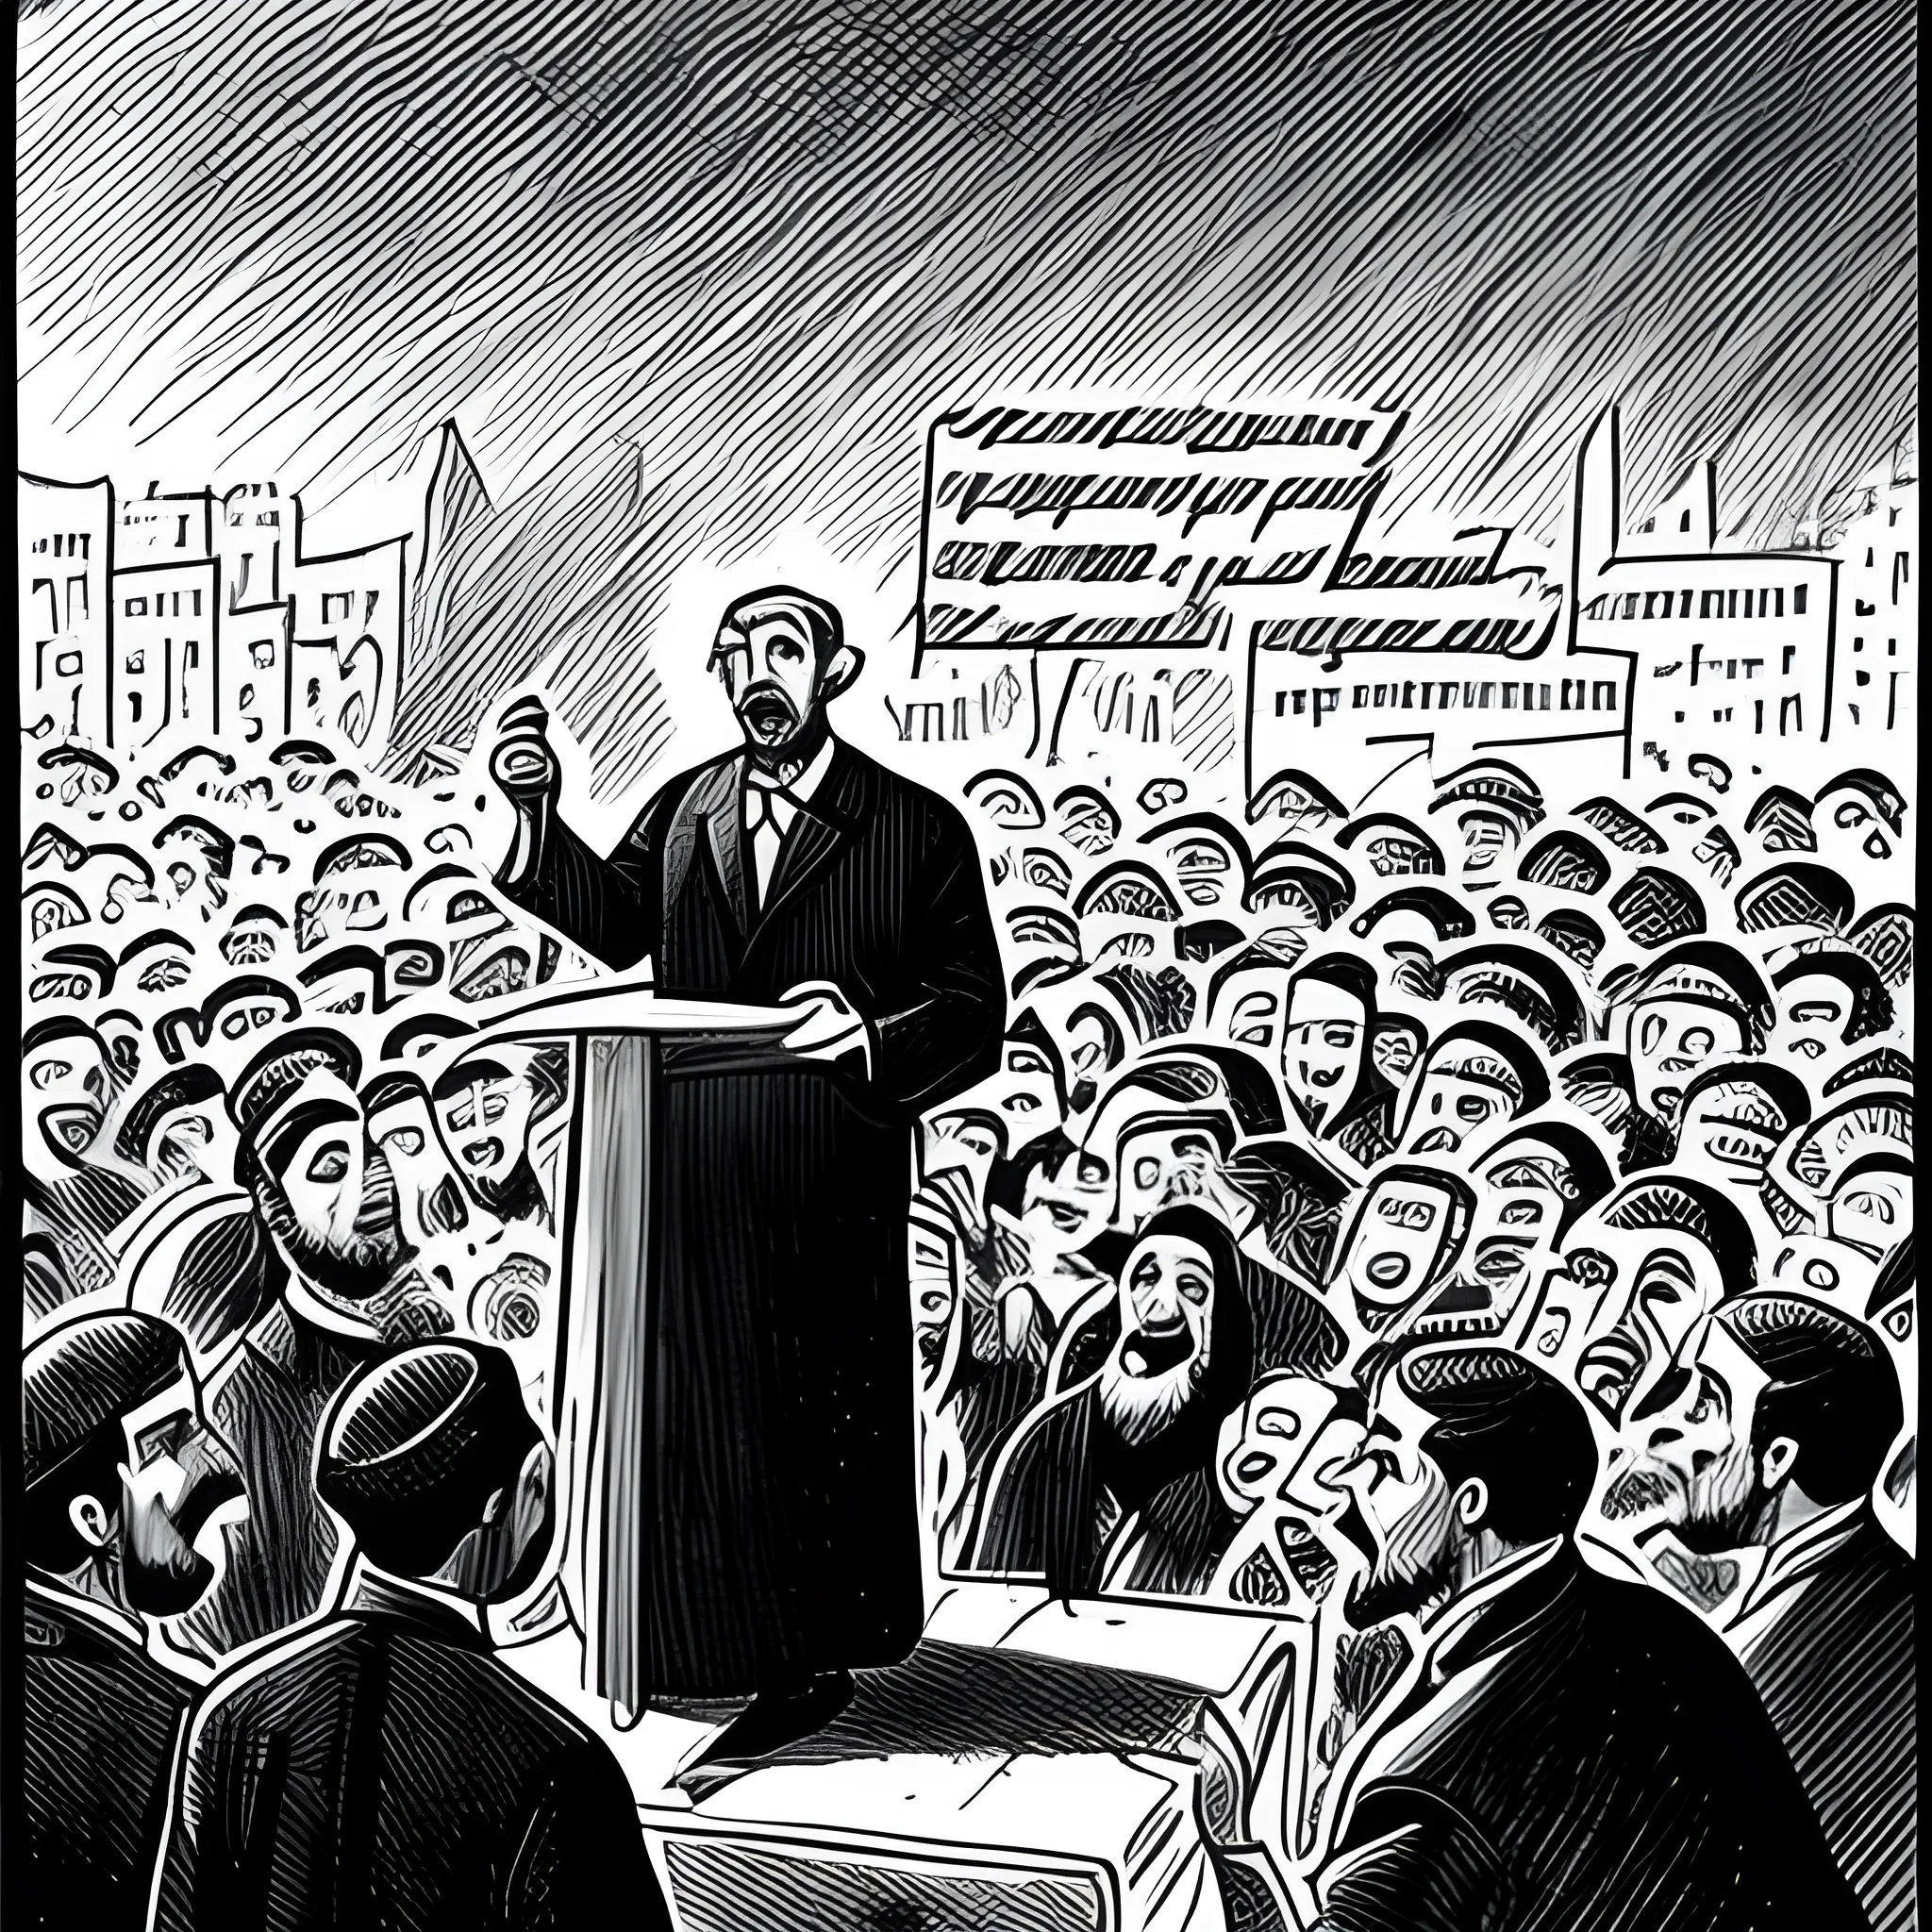  Draw a PROPHET SPEAKING TO THE CROWD IN OLD JEWISH ISRAEL, Cartoon